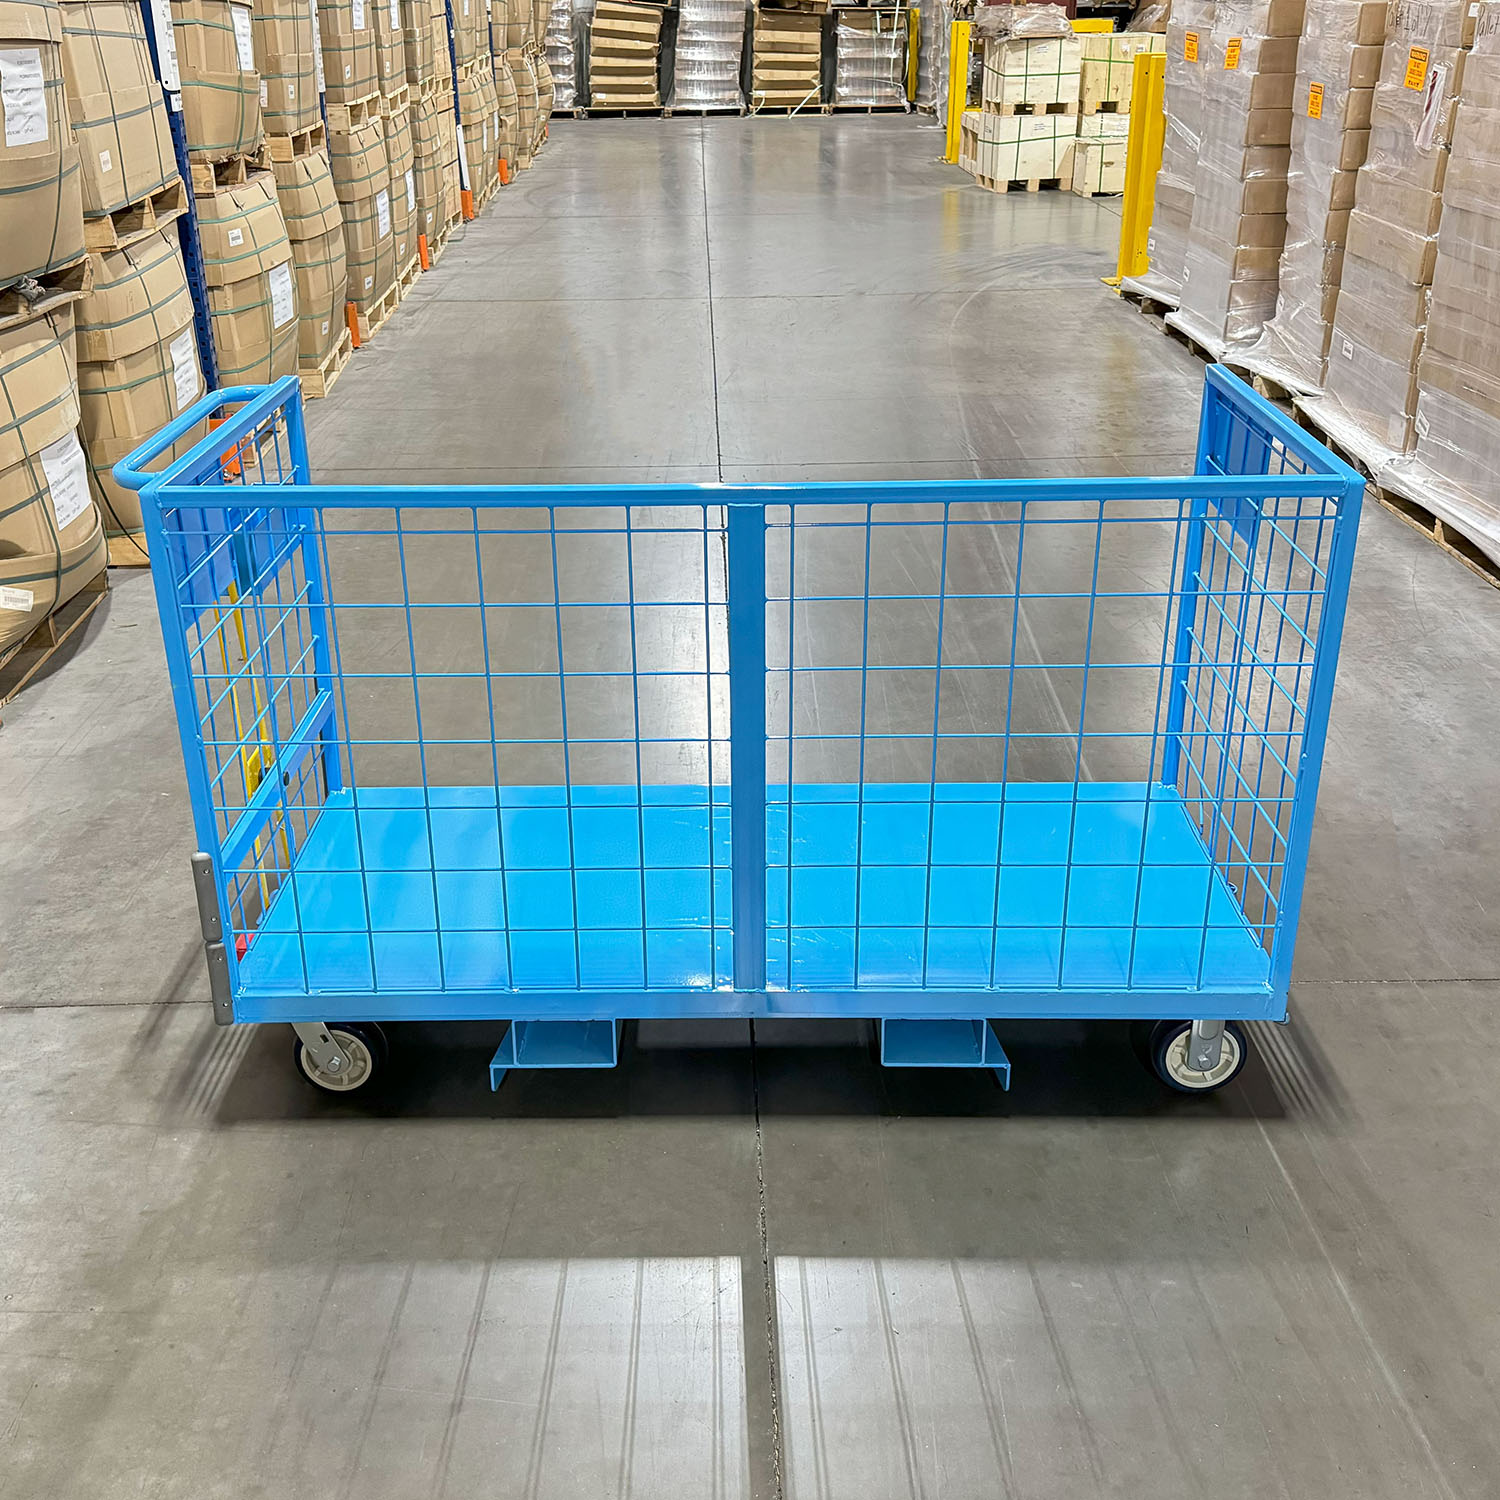 Industrial Carts: Durable carts designed for heavy-duty material handling tasks in industrial settings. Various configurations available, including shelf carts, platform carts, and utility carts. Constructed with robust materials such as steel or aluminum for long-lasting performance. Ideal for transporting goods, equipment, and supplies within warehouses, manufacturing facilities, and distribution centers. Picking Carts: Specifically designed for order picking applications in warehouses and fulfillment centers. Features multiple shelves or compartments for efficient organization of picked items. Ergonomic design to enhance worker productivity and minimize fatigue during picking operations. Compatible with barcode scanning and labeling systems for accurate order fulfillment. Forklift-Compatible Carts: Designed with compatibility for forklifts, allowing for easy loading, unloading, and transportation. Equipped with integrated forklift pockets or attachments for secure handling and maneuverability. Available in various sizes and configurations to accommodate different loads and warehouse layouts. Streamline material handling processes by enabling seamless integration with forklift operations. Utility Carts: Versatile carts suitable for a wide range of material handling tasks in industrial and commercial environments. Ideal for transporting tools, supplies, and products across warehouses, workshops, and retail spaces. Features sturdy construction and ergonomic handles for ease of use and durability. Available in different configurations, including flatbed, shelf, and service carts, to meet diverse application needs. Distribution Carts: Designed for efficient distribution and transportation of goods within warehouses, distribution centers, and retail stores. Equipped with shelves, bins, or compartments to organize and secure items during transit. Enhance workflow and productivity in distribution operations, minimizing manual handling and streamlining order fulfillment processes. E-commerce Carts: Tailored for the unique demands of e-commerce fulfillment, including order picking, packing, and shipping. Designed to navigate narrow aisles and crowded warehouse spaces with ease. Compatible with automated warehouse systems and conveyor belts for seamless integration into e-commerce fulfillment workflows. Configurable with accessories such as barcode scanners, label printers, and workstation attachments for efficient order processing. Grocery Carts: Specifically designed for handling groceries and perishable items in supermarkets, grocery stores, and food distribution centers. Features durable construction and smooth-rolling casters for easy maneuverability in crowded aisles. Available in different sizes and configurations to accommodate various types of produce and merchandise. Department Store Carts: Tailored for retail environments, including department stores, big-box retailers, and shopping malls. Designed with aesthetic appeal and functionality to enhance the shopping experience for customers. Features compartments for organizing merchandise, signage holders for promotional materials, and ergonomic handles for customer convenience. Beverage Carts: Specifically designed for transporting beverages, including bottles, cans, and kegs, in beverage distribution centers, warehouses, and retail stores. Features sturdy construction and secure storage options to prevent damage or spillage during transit. Available in various configurations, including shelf carts, dolly carts, and hand trucks, to accommodate different types of beverages and packaging. Backstock Carts: Designed for efficiently managing backstock inventory in warehouses and storage areas. Features adjustable shelves, bins, or dividers to organize and store surplus inventory. Optimizes space utilization and inventory management, reducing stockouts and improving order fulfillment efficiency. Rolltainer Carts: Combination of a rolling cart and a container, designed for transporting and storing goods in retail, distribution, and logistics applications. Features collapsible sides or folding design for space-saving storage when not in use. Ideal for cross-docking operations, temporary storage, and merchandise display in retail environments. Order Picker Carts: Specifically designed for order picking tasks in warehouses and distribution centers. Features elevated platforms or picking trays for easy access to items at various heights. Equipped with safety features such as guardrails and non-slip surfaces to protect workers during picking operations. Compatible with order picking systems and technologies for increased efficiency and accuracy. Tugger Carts: Designed to be towed by tugger vehicles or automated guided vehicles (AGVs) for efficient material handling in manufacturing and distribution facilities. Features a hitch or coupling mechanism for secure attachment to the towing vehicle. Available in various sizes and configurations to accommodate different loads and towing requirements. Enhances productivity by reducing manual handling and streamlining material flow in production and distribution processes. Bakery Carts: Designed specifically for transporting baked goods, including bread, pastries, and cakes, in bakery production facilities and retail outlets. Features open or perforated shelves to allow for proper air circulation and prevent condensation buildup. Available in stainless steel or aluminum construction for easy cleaning and durability in food-handling environments. Produce Carts: Tailored for transporting fruits, vegetables, and other fresh produce in grocery stores, farmers' markets, and food distribution centers. Features slotted or perforated shelves to allow for proper airflow and drainage, maintaining the freshness of the produce. Available in various configurations, including single-sided, double-sided, and nesting carts, to optimize space utilization and facilitate efficient merchandising. Crisping Racks: Designed for cooling and crisping freshly baked or fried foods, such as cookies, pastries, and fried chicken, in commercial kitchens and foodservice establishments. Features wire racks or trays with elevated surfaces to allow air circulation and prevent condensation buildup. Available in stackable designs to maximize space efficiency and facilitate large-scale food production.